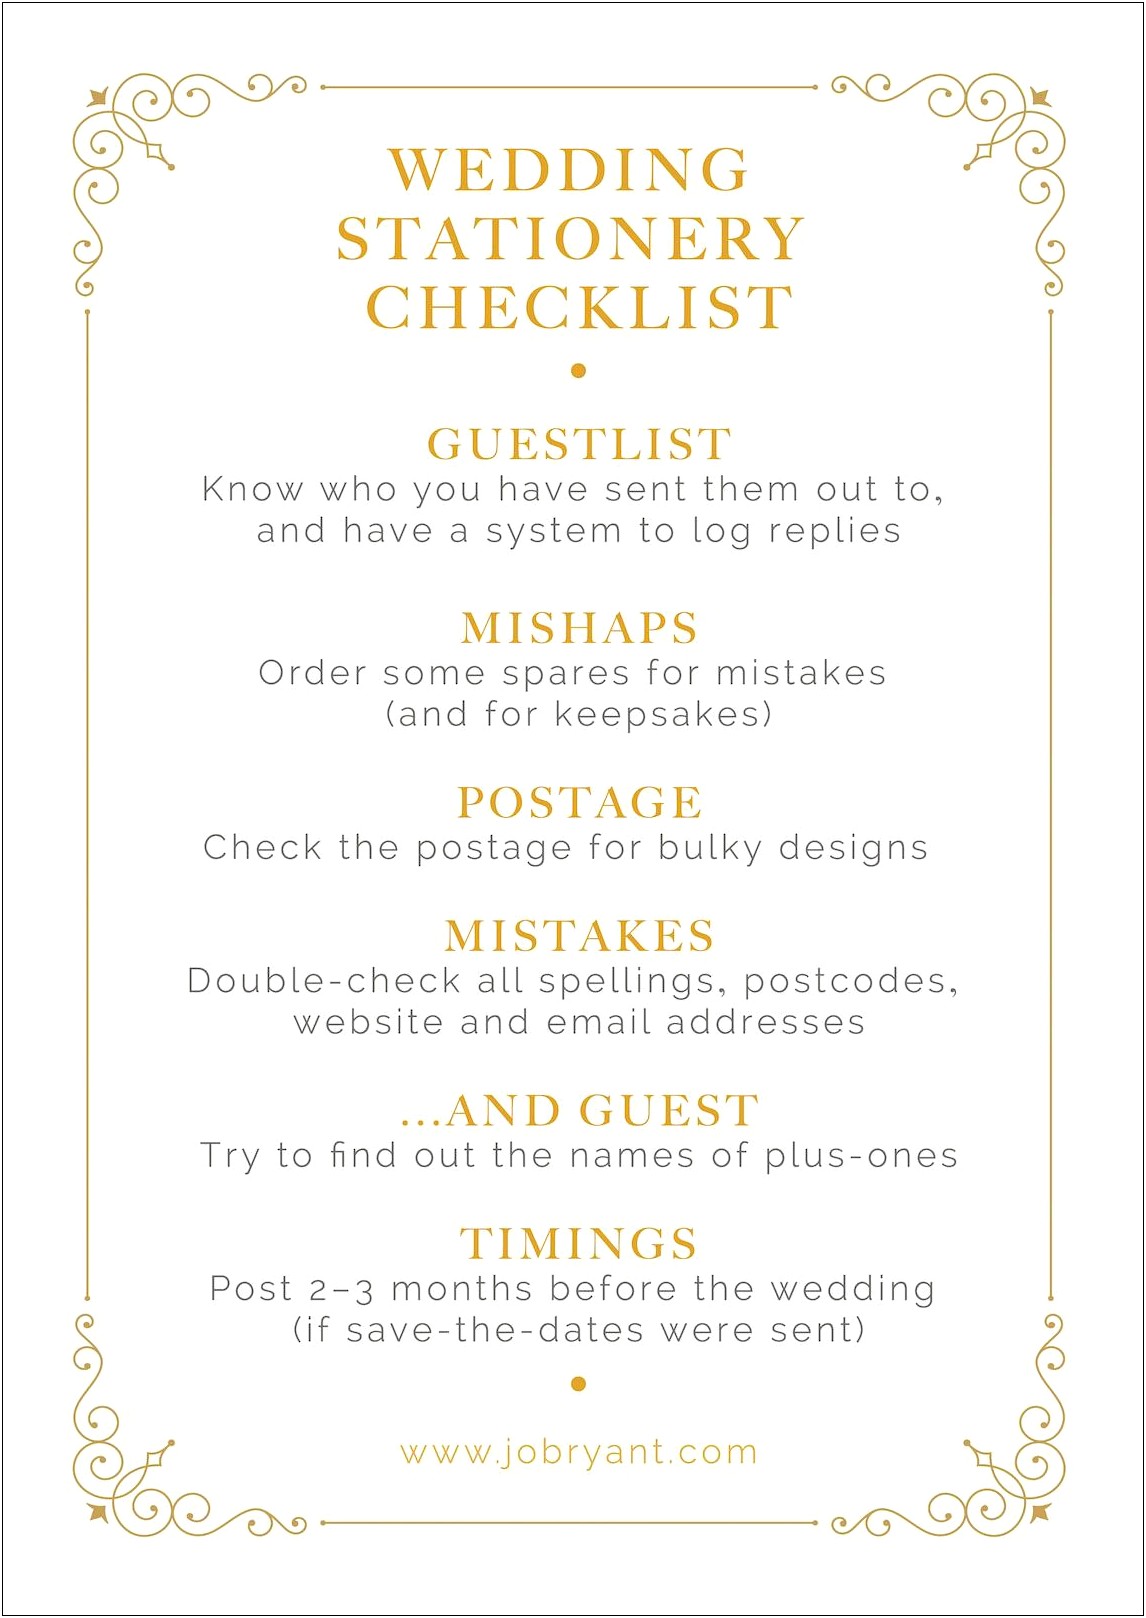 Do You Include Dress Code On Wedding Invitations